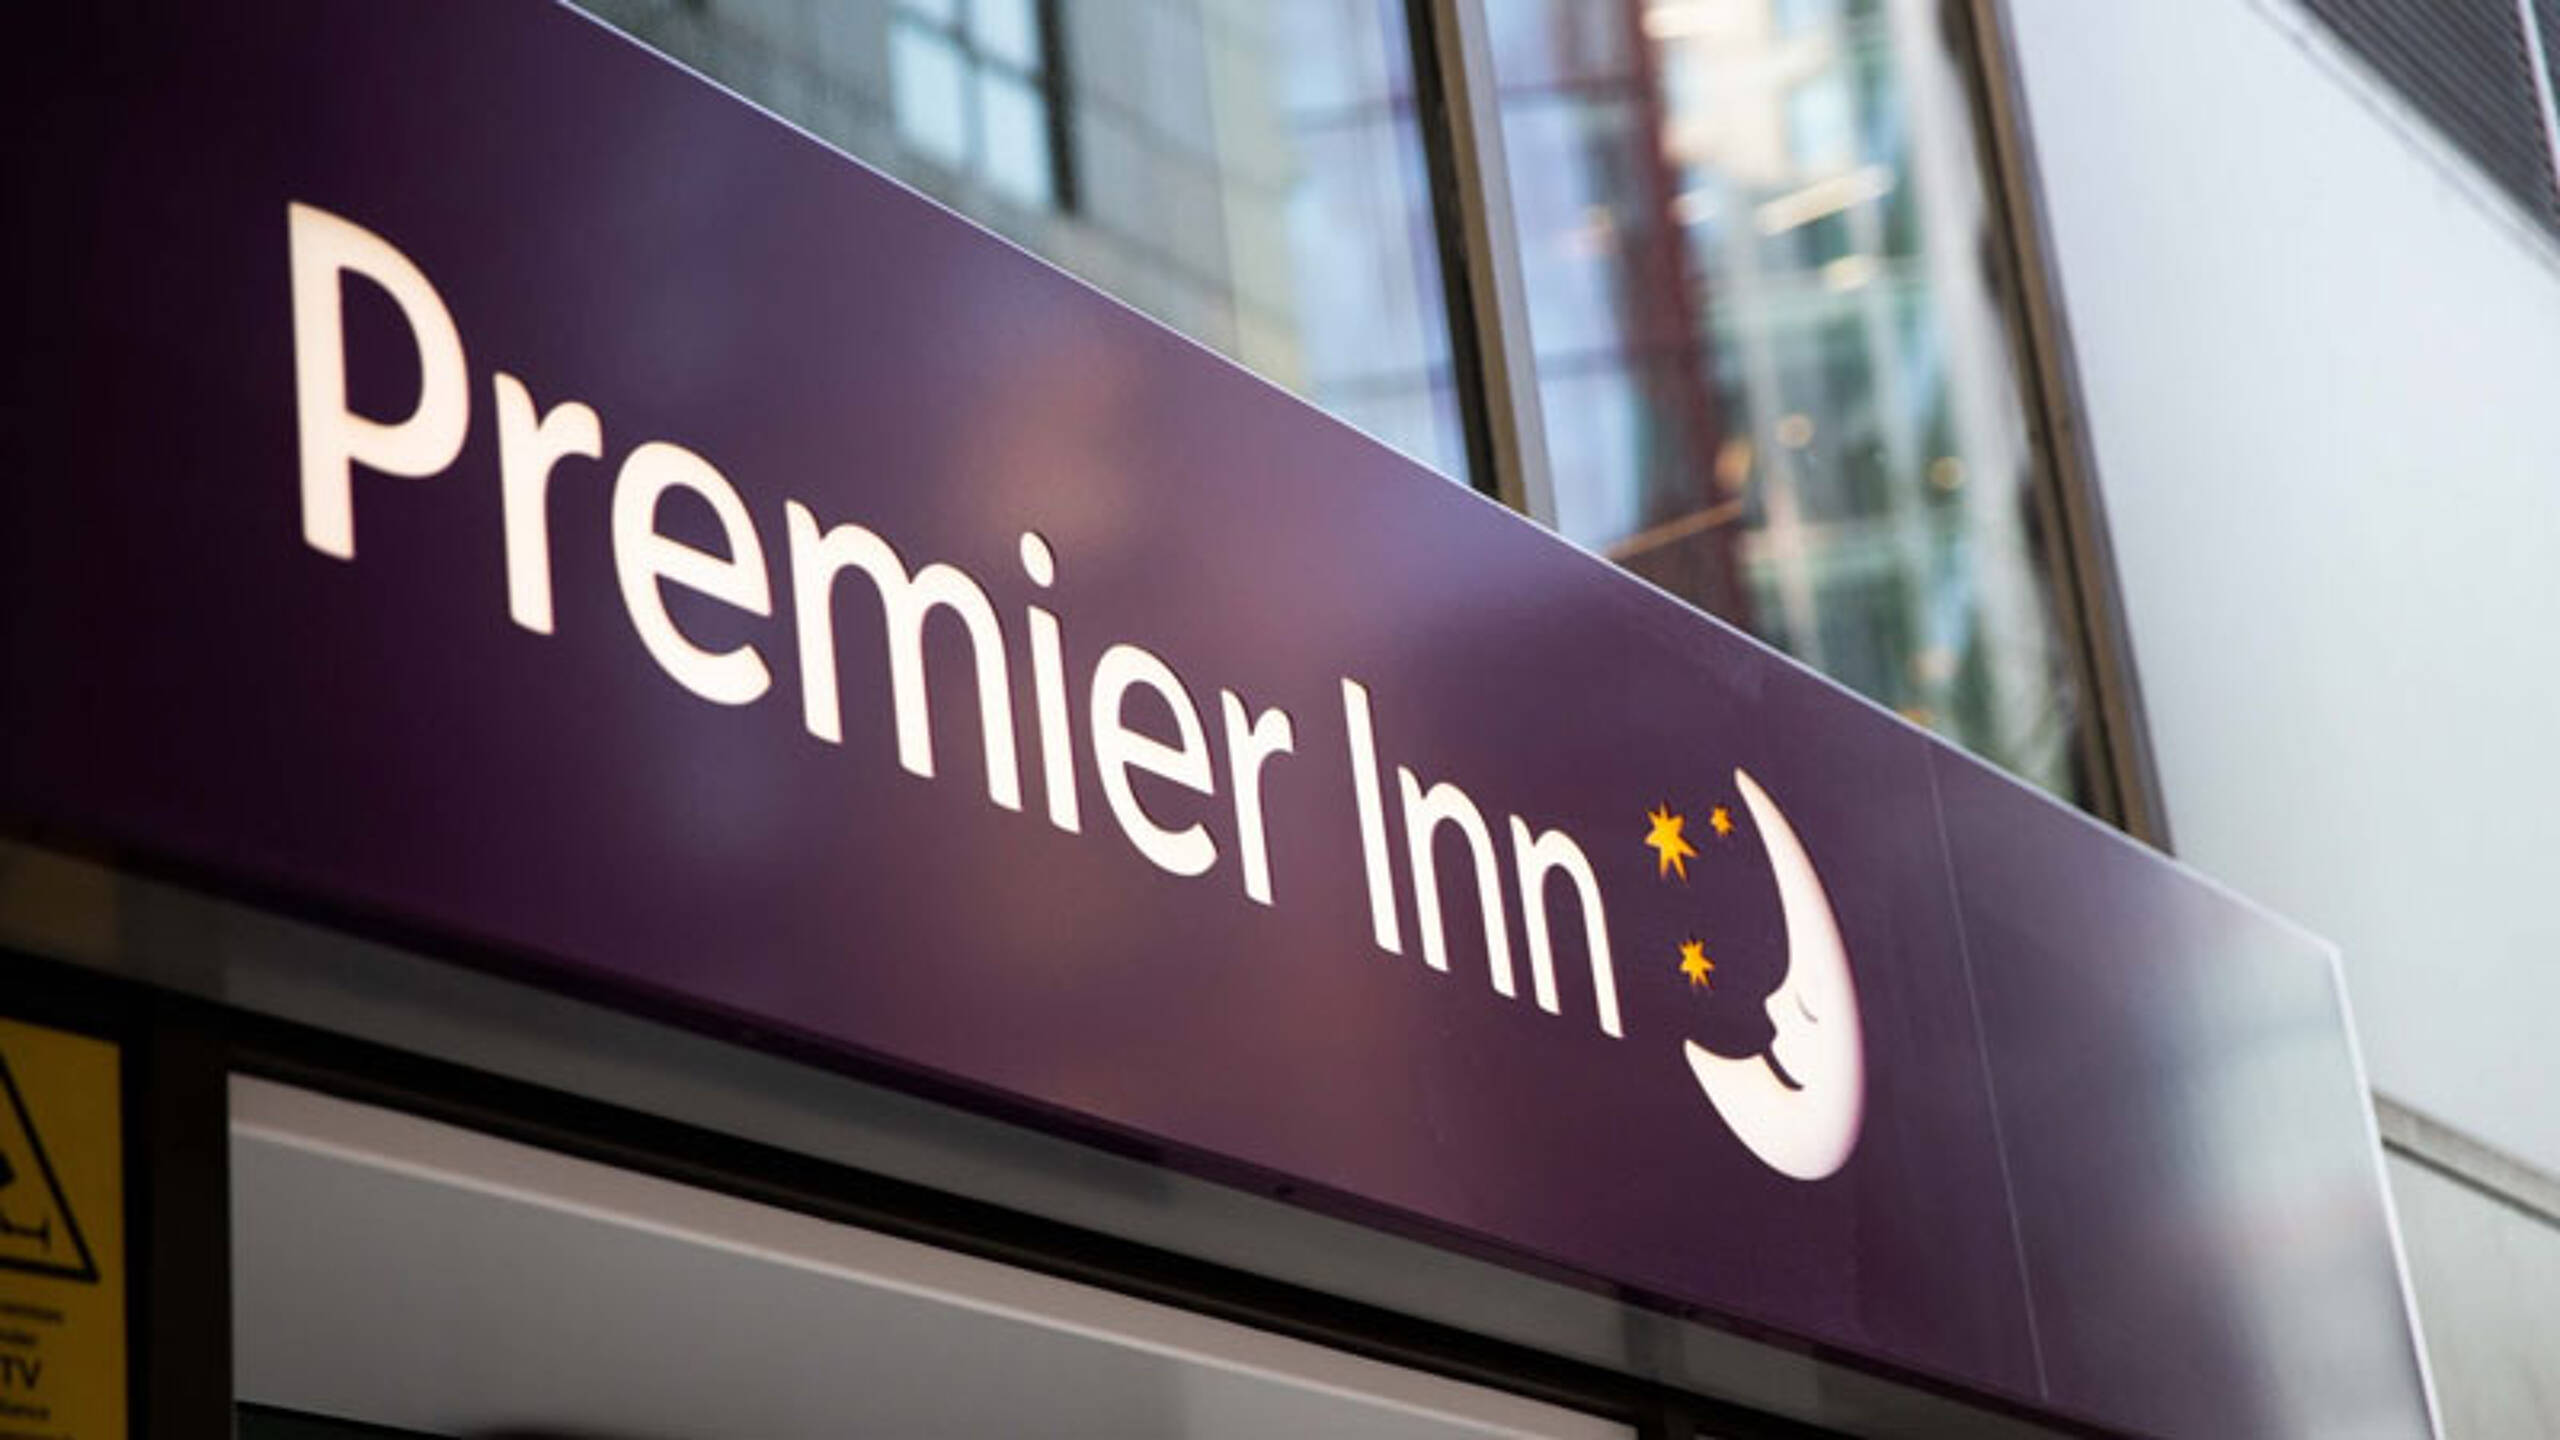 Premier Inn to replace gas with heat pumps across hotel estate